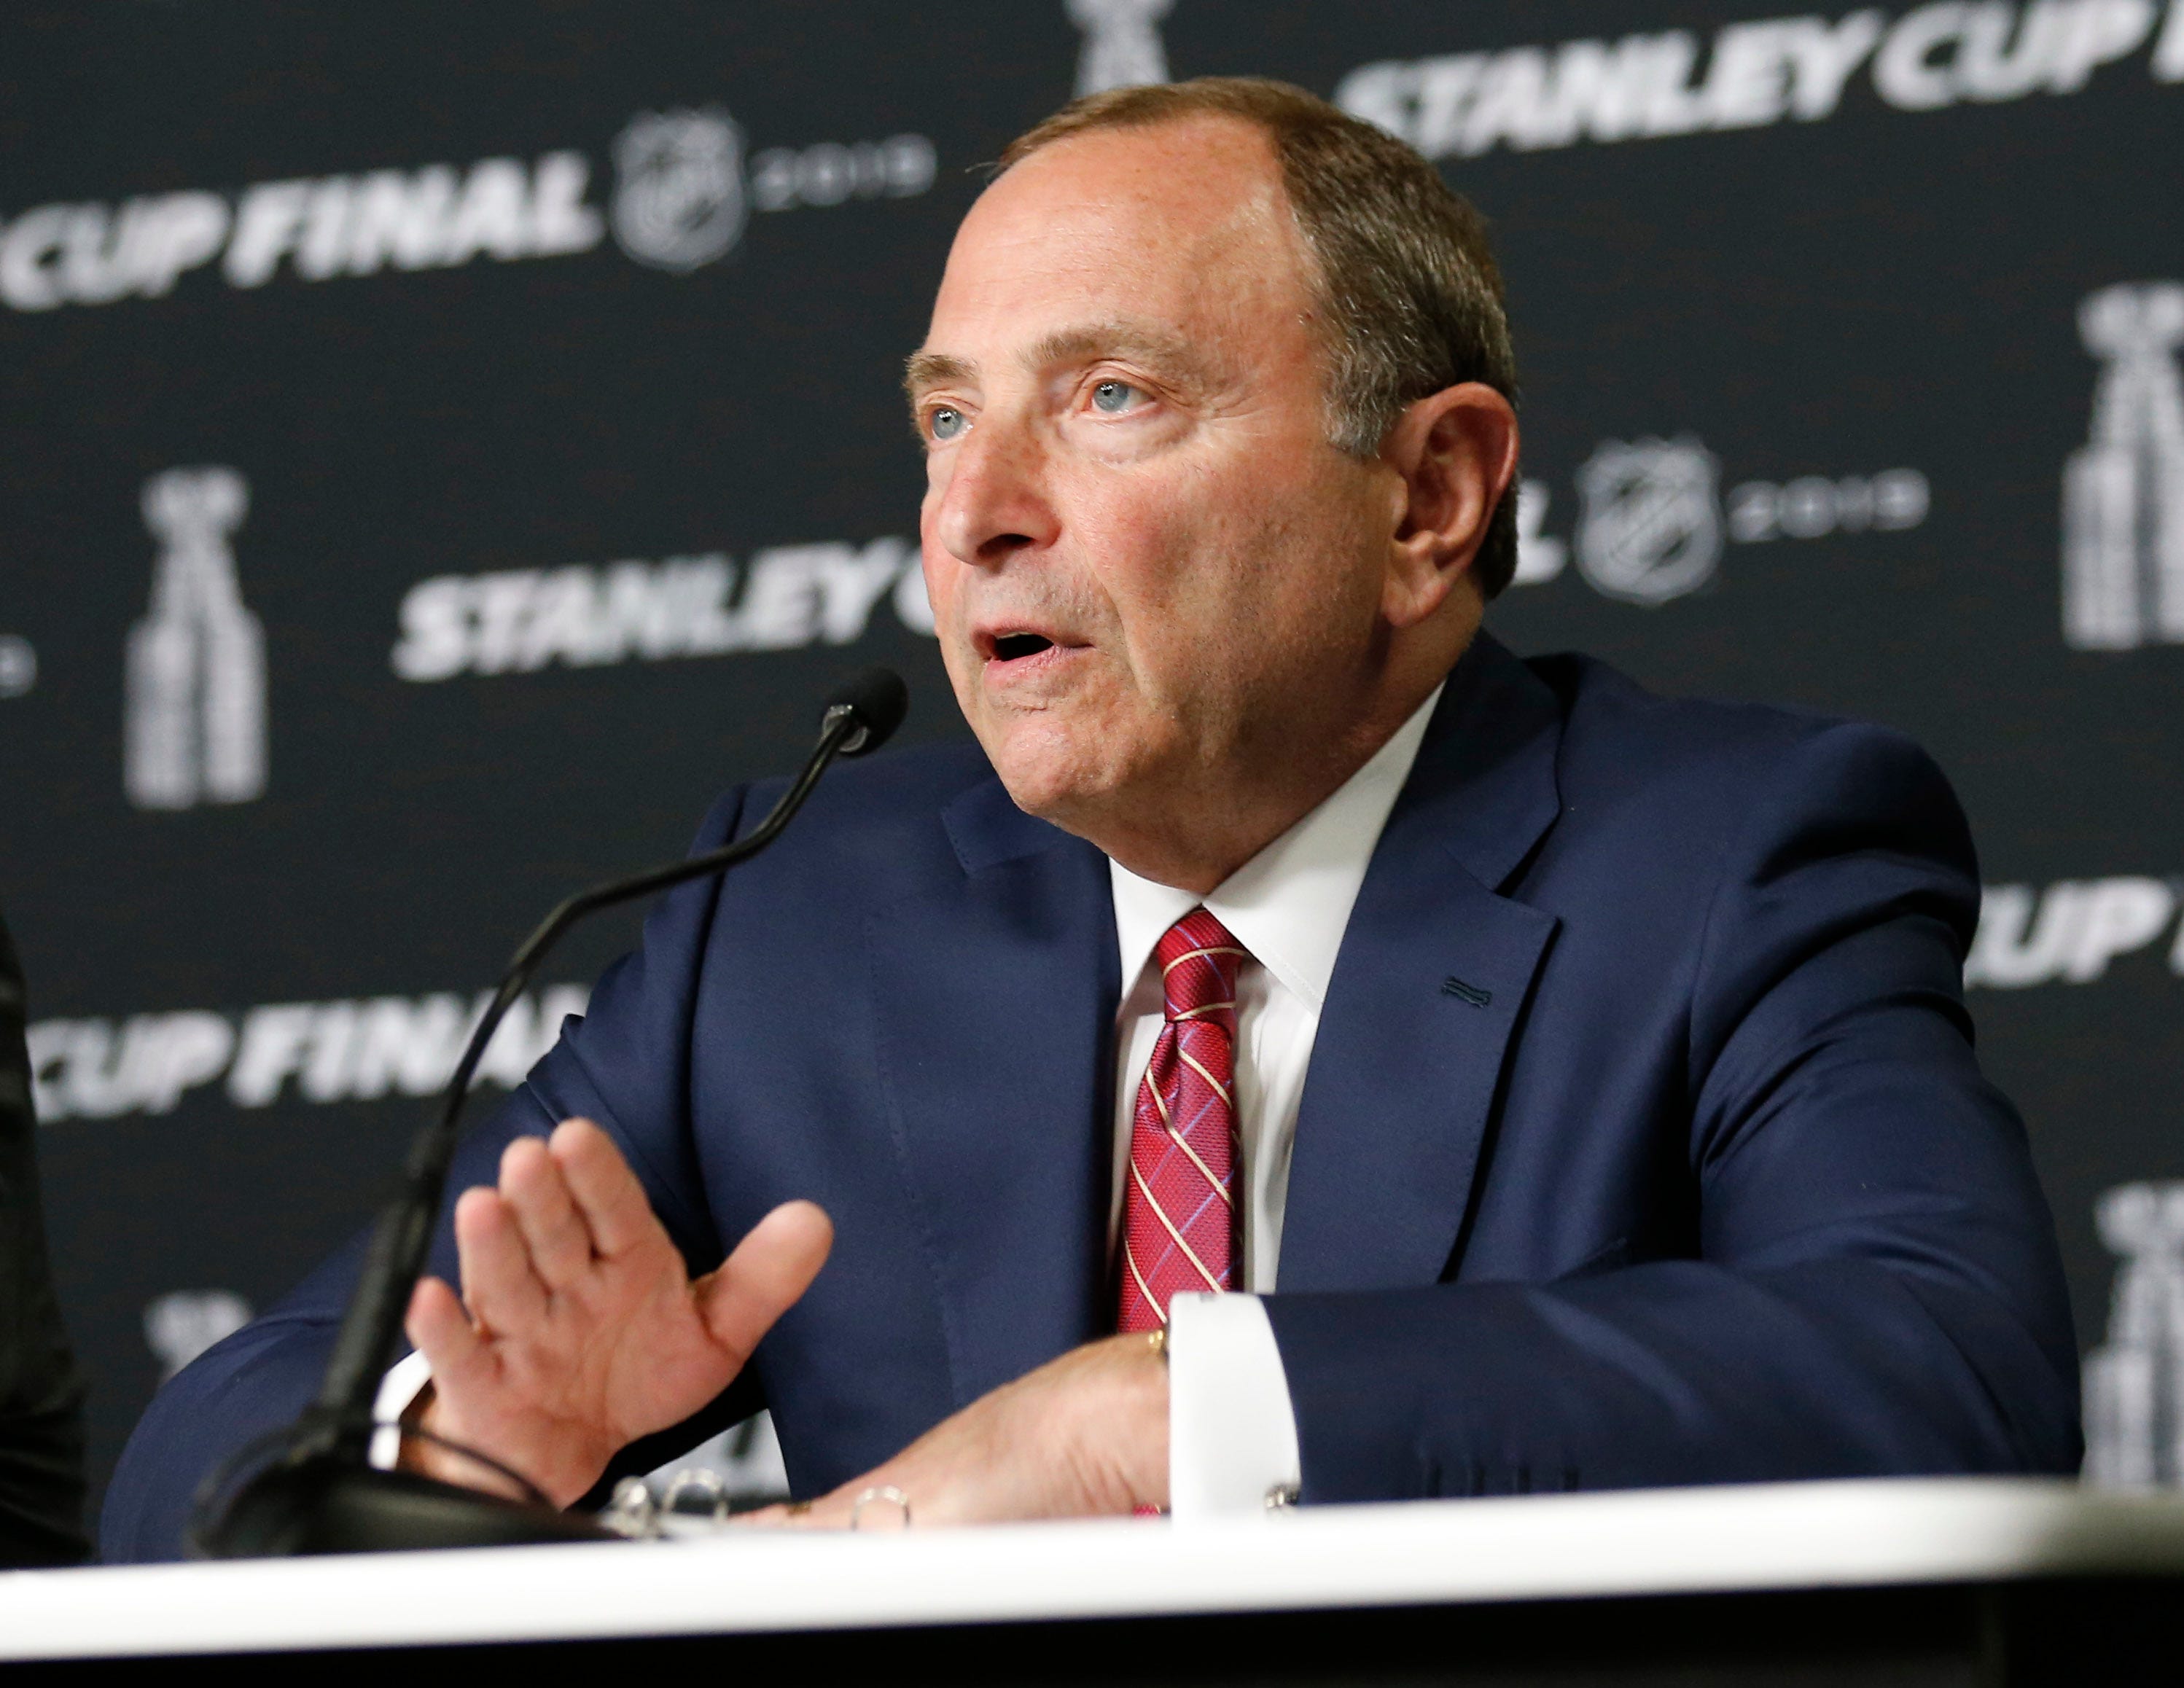 NHL commissioner Gary Bettman non-committal on punishments for Stan Bowman, others